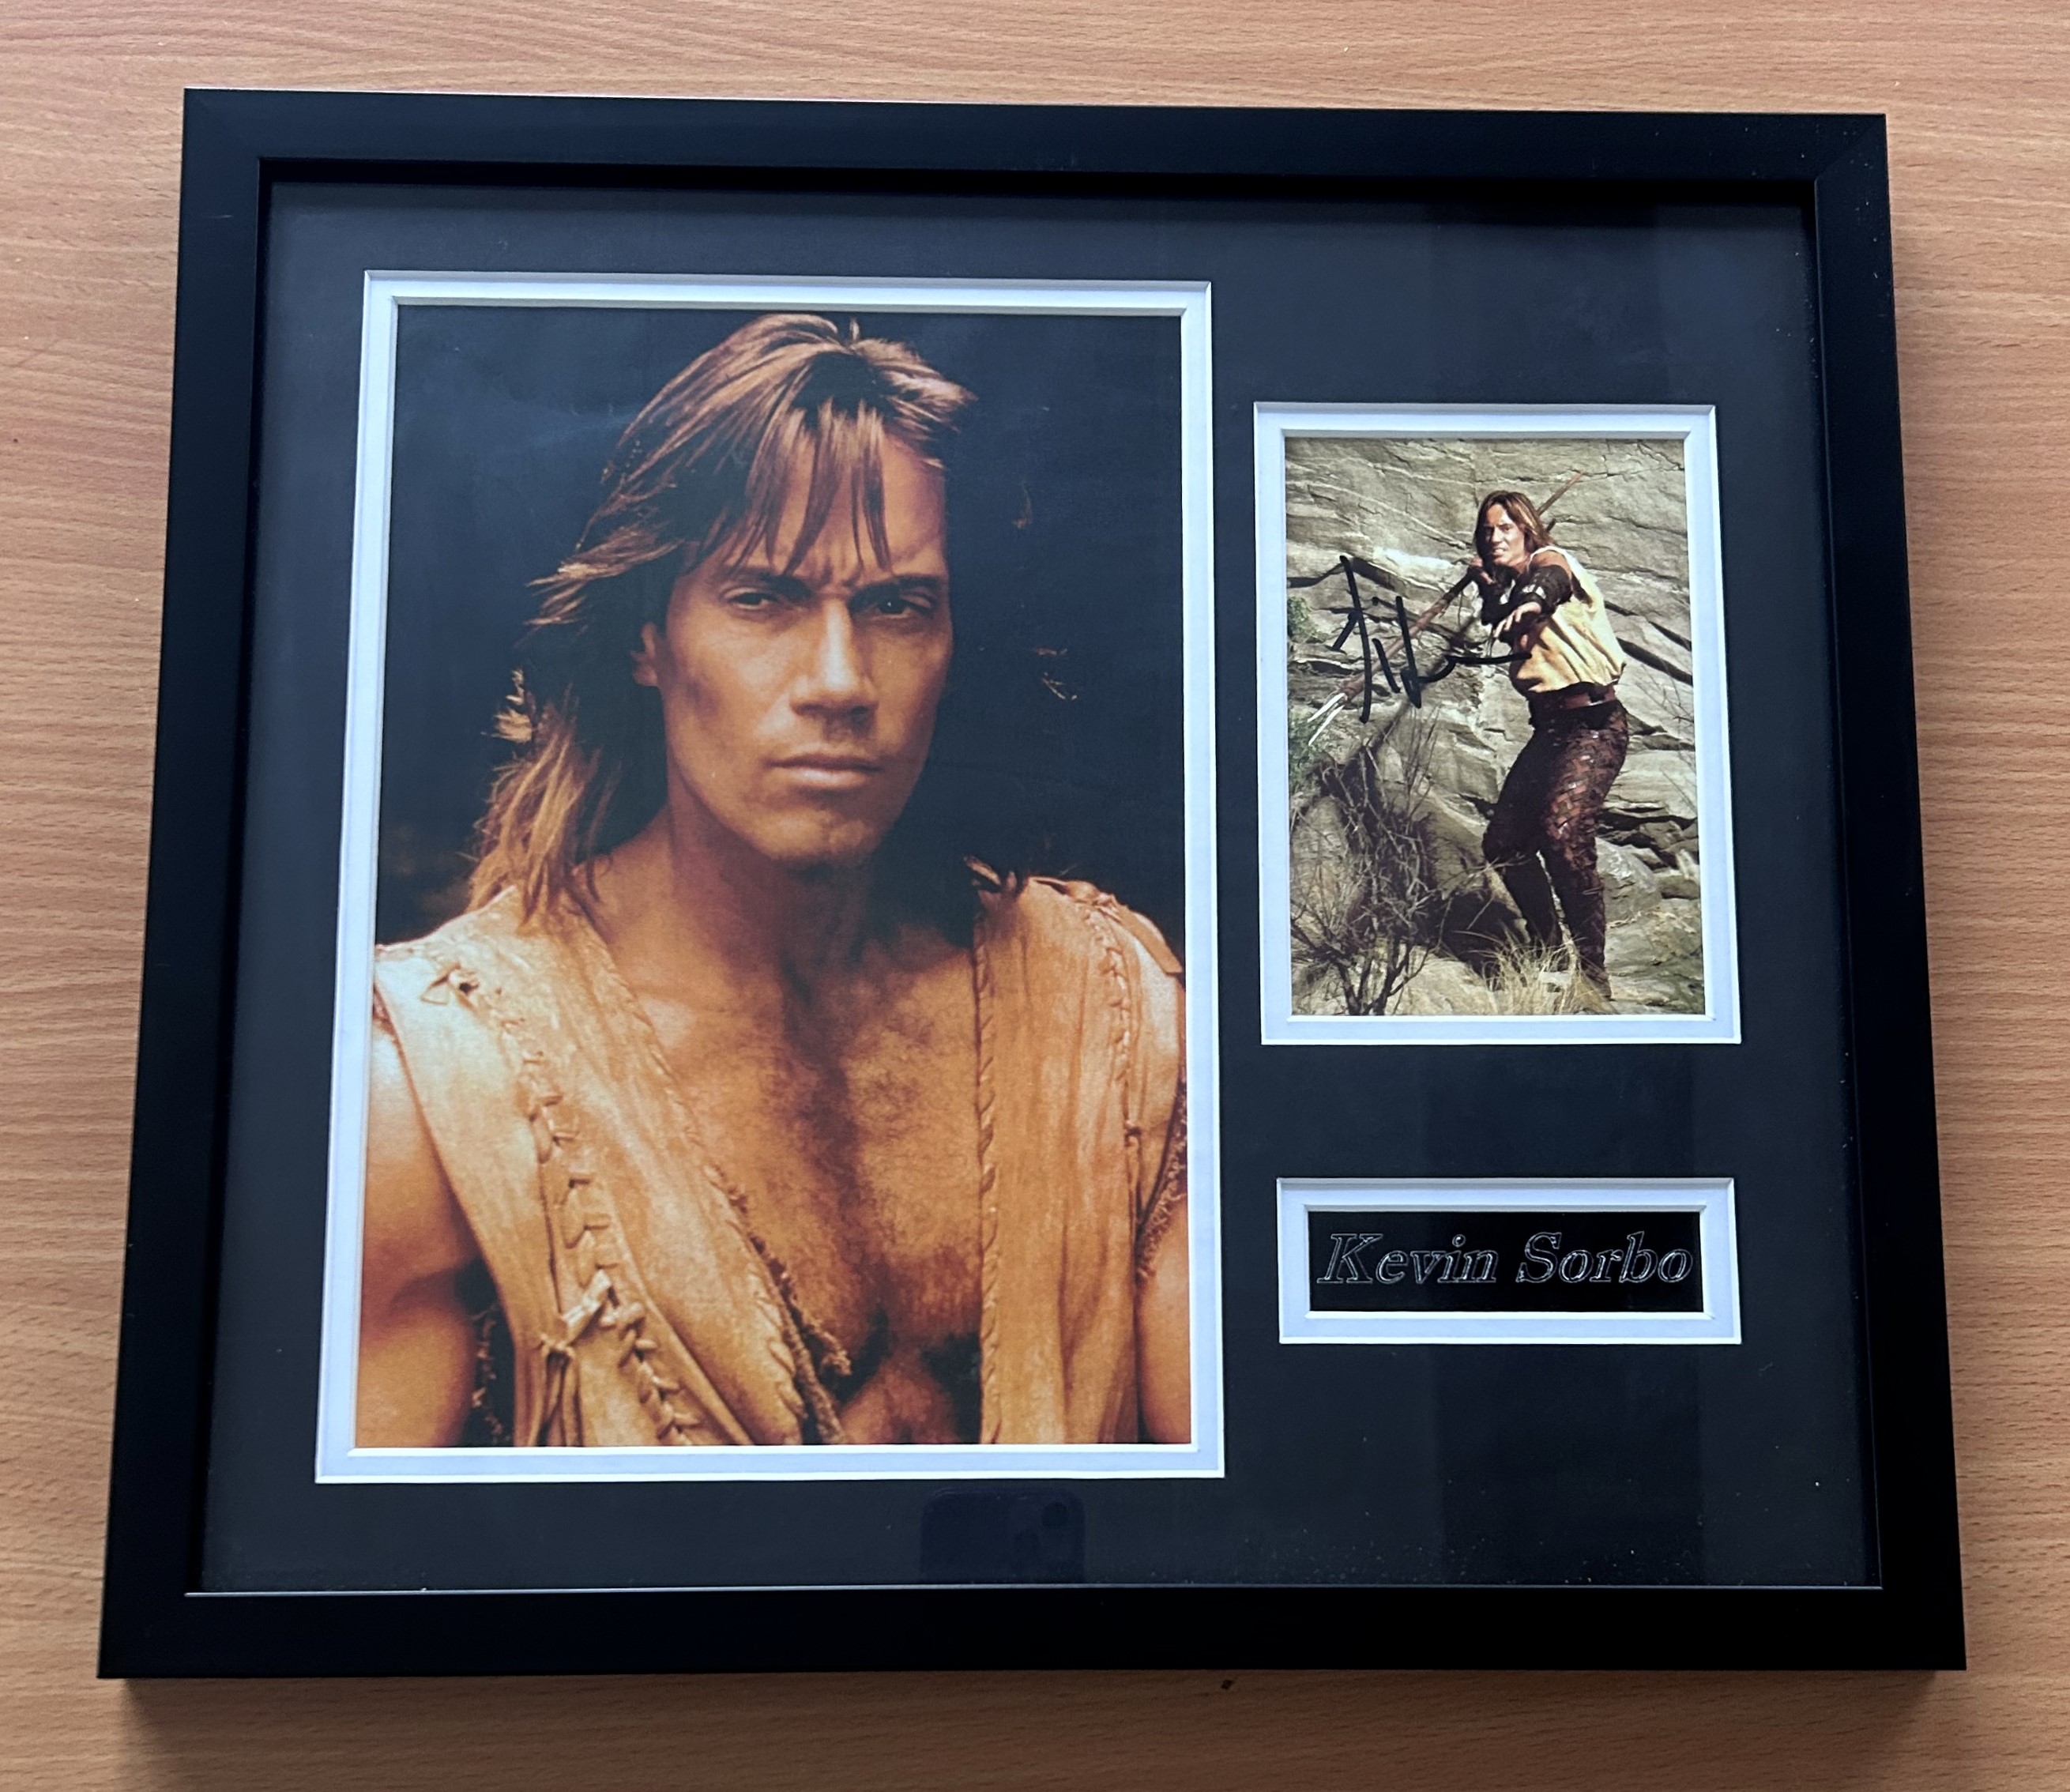 Kevin Sorbo signed frame 2 colour photos, 1 signed and name plaque. Measures 15"x17" appx. Good